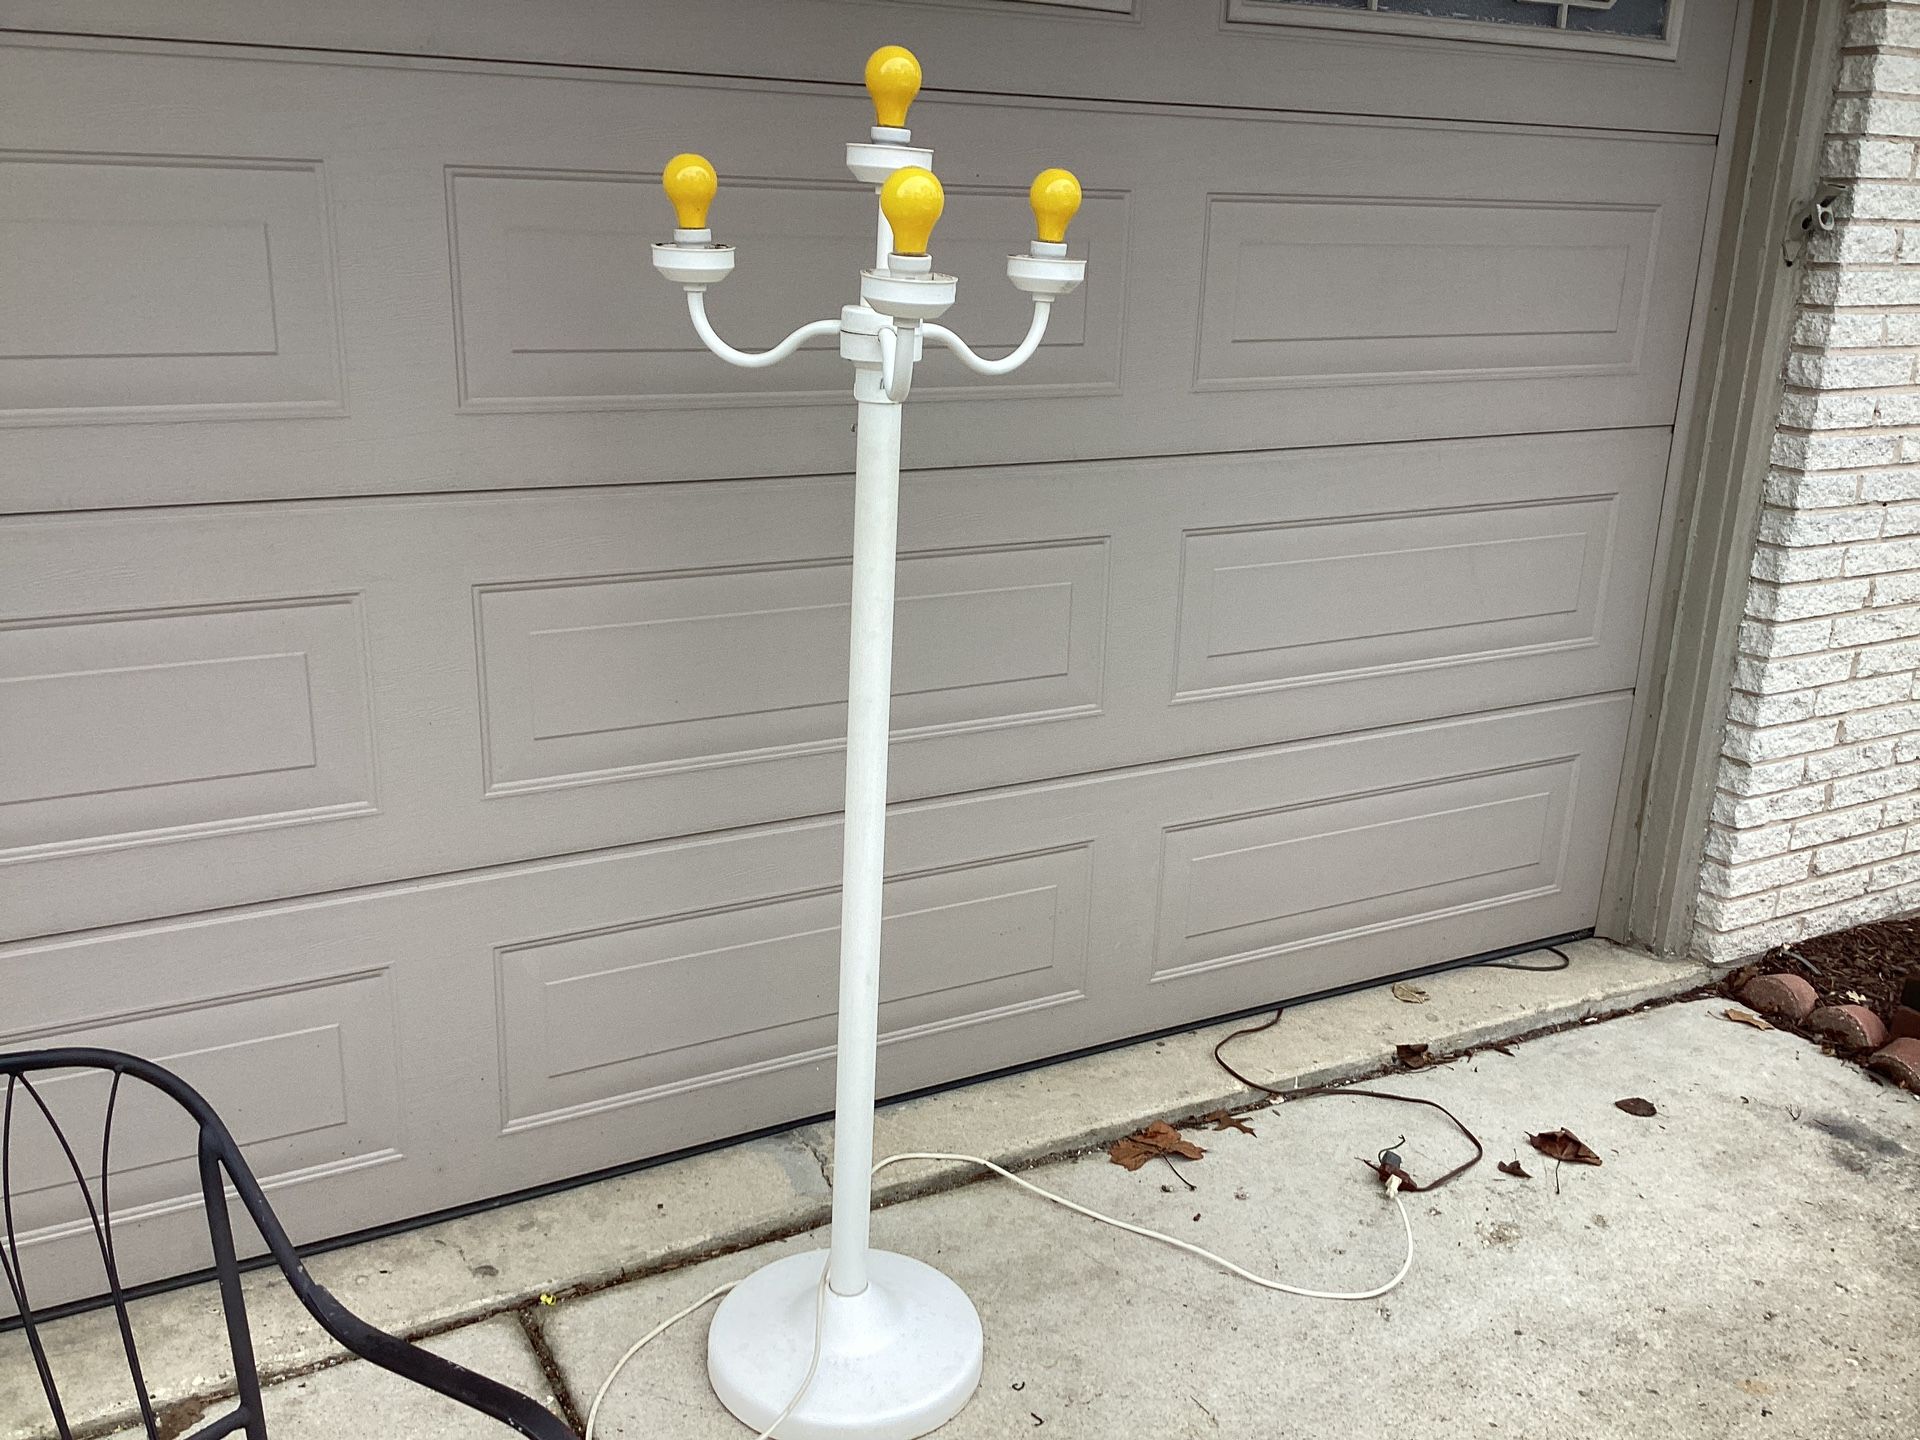 Electric outdoor/ indoor lamp post with 4 lights use standard bulbs 62 tall switch 3 setting ..globes come with it,weighted base for outdoor use ..